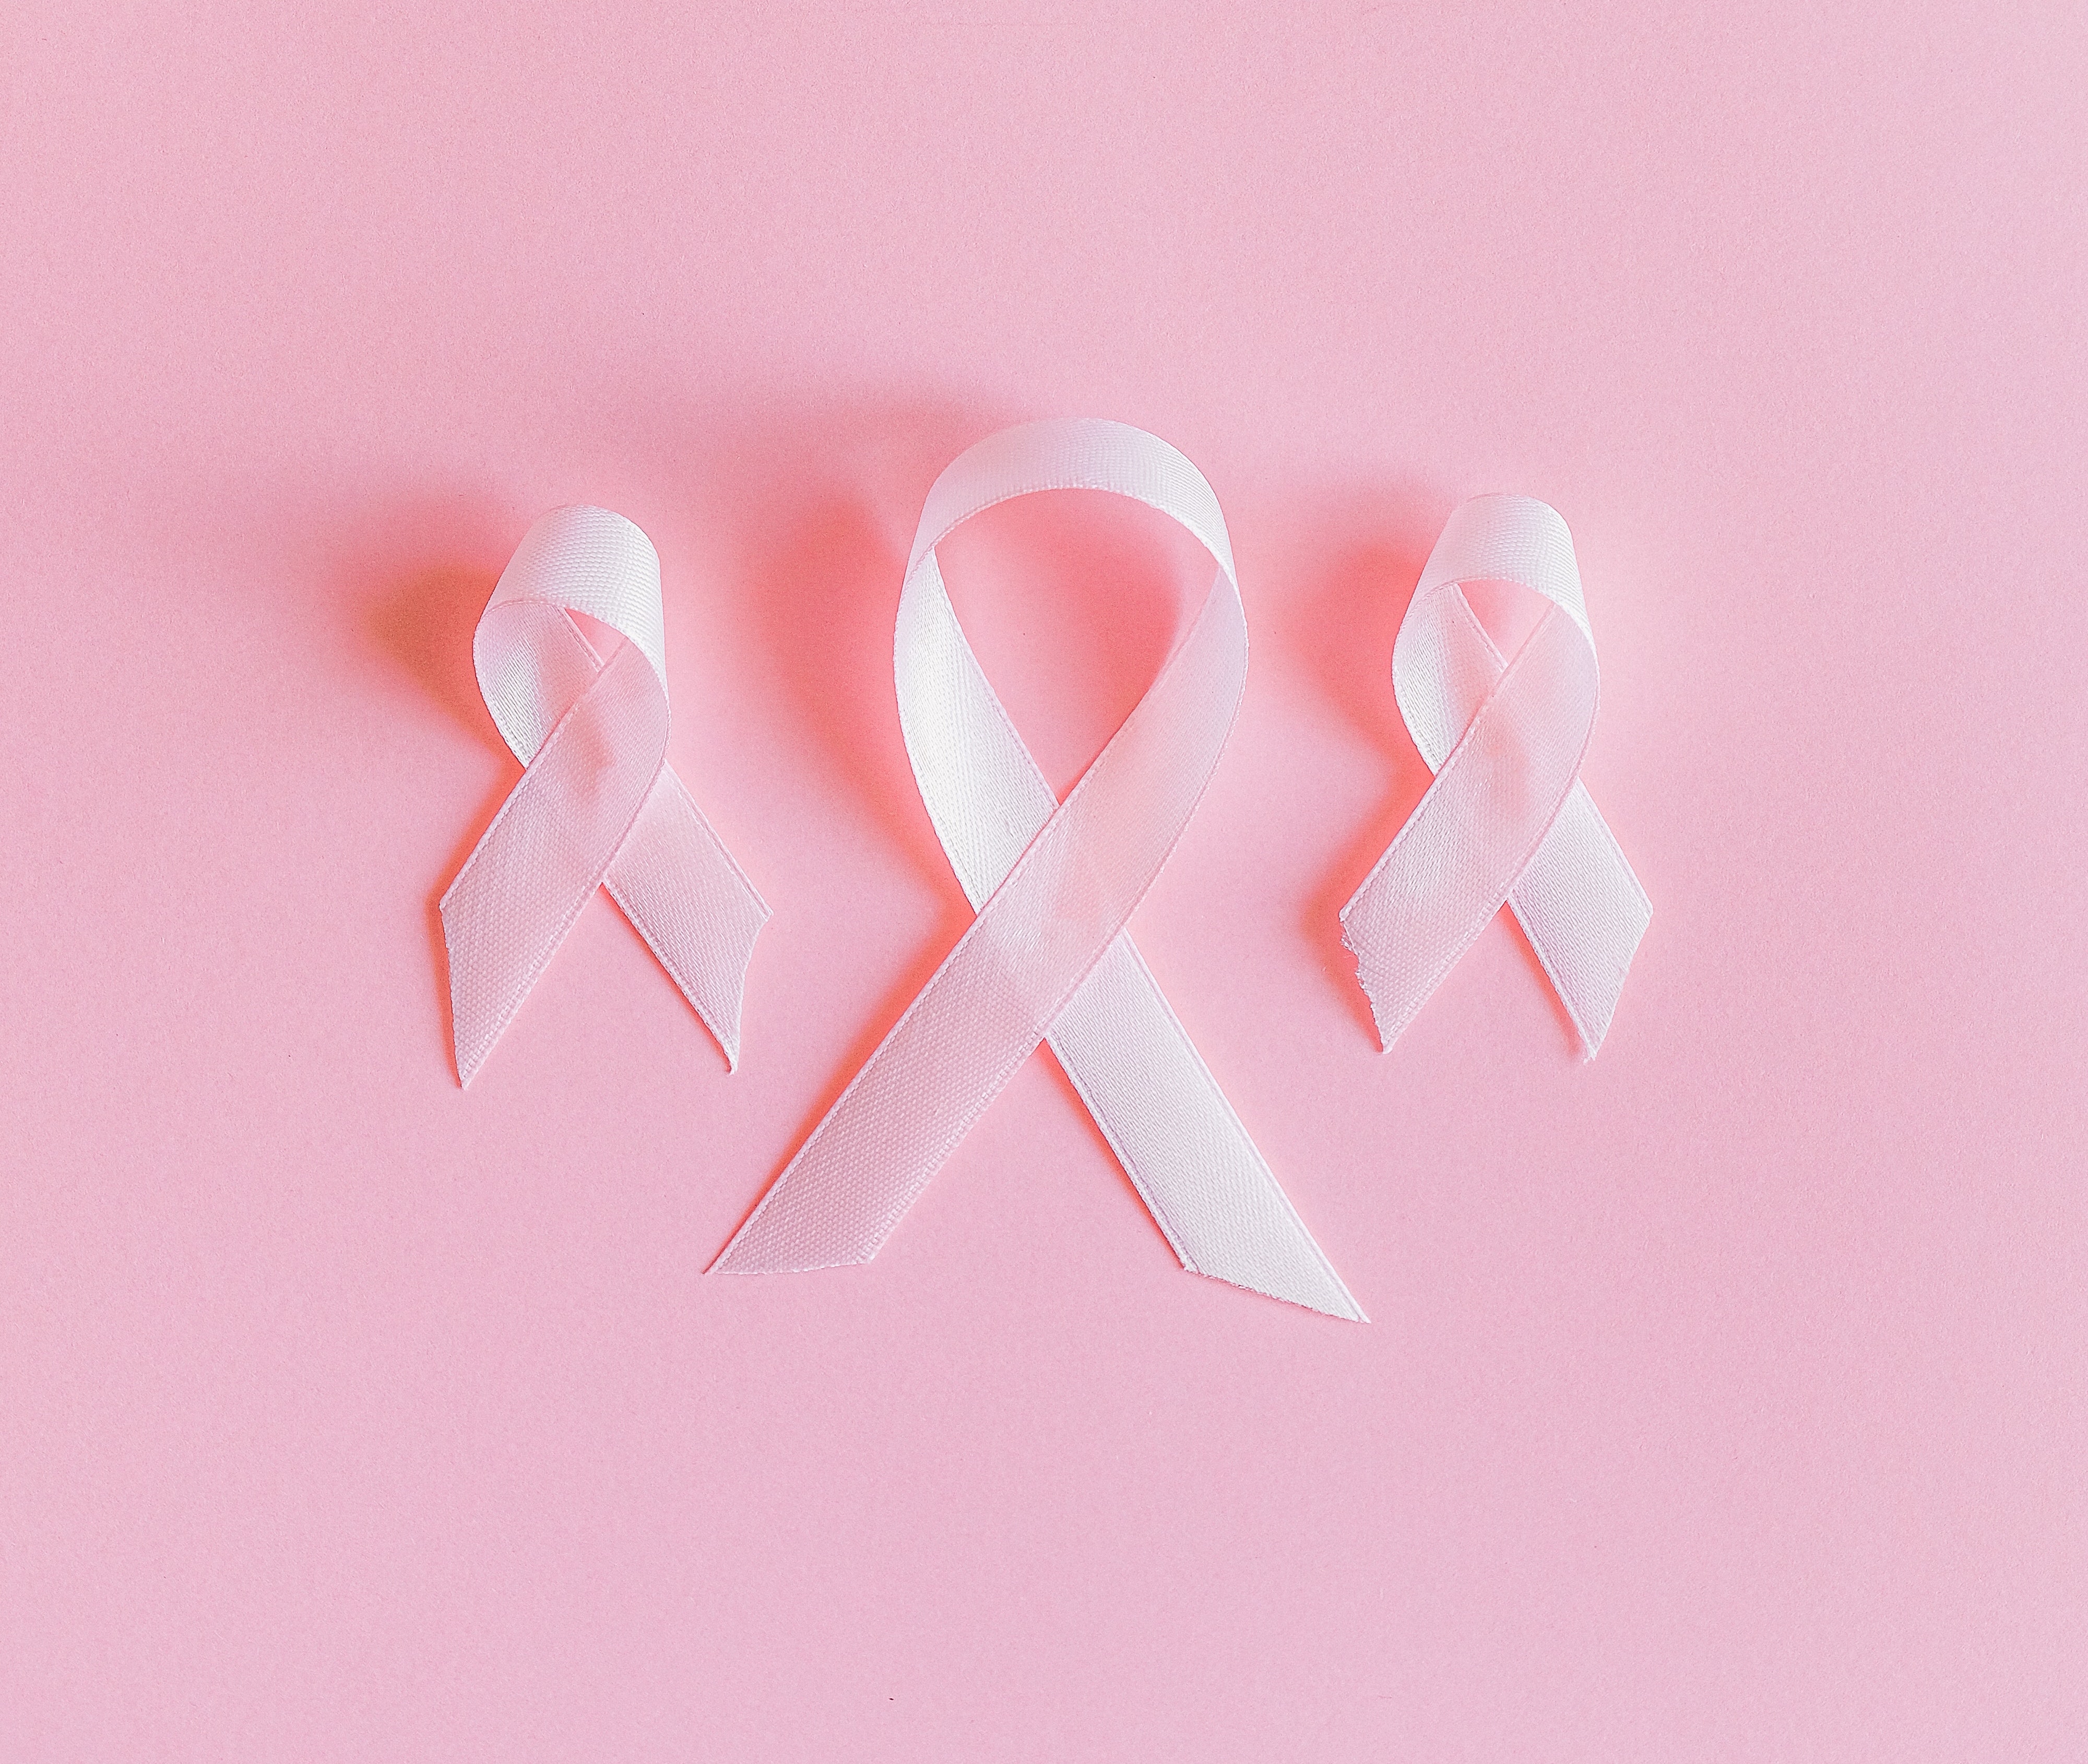 Three breast cancer awareness ribbons on a pink background.